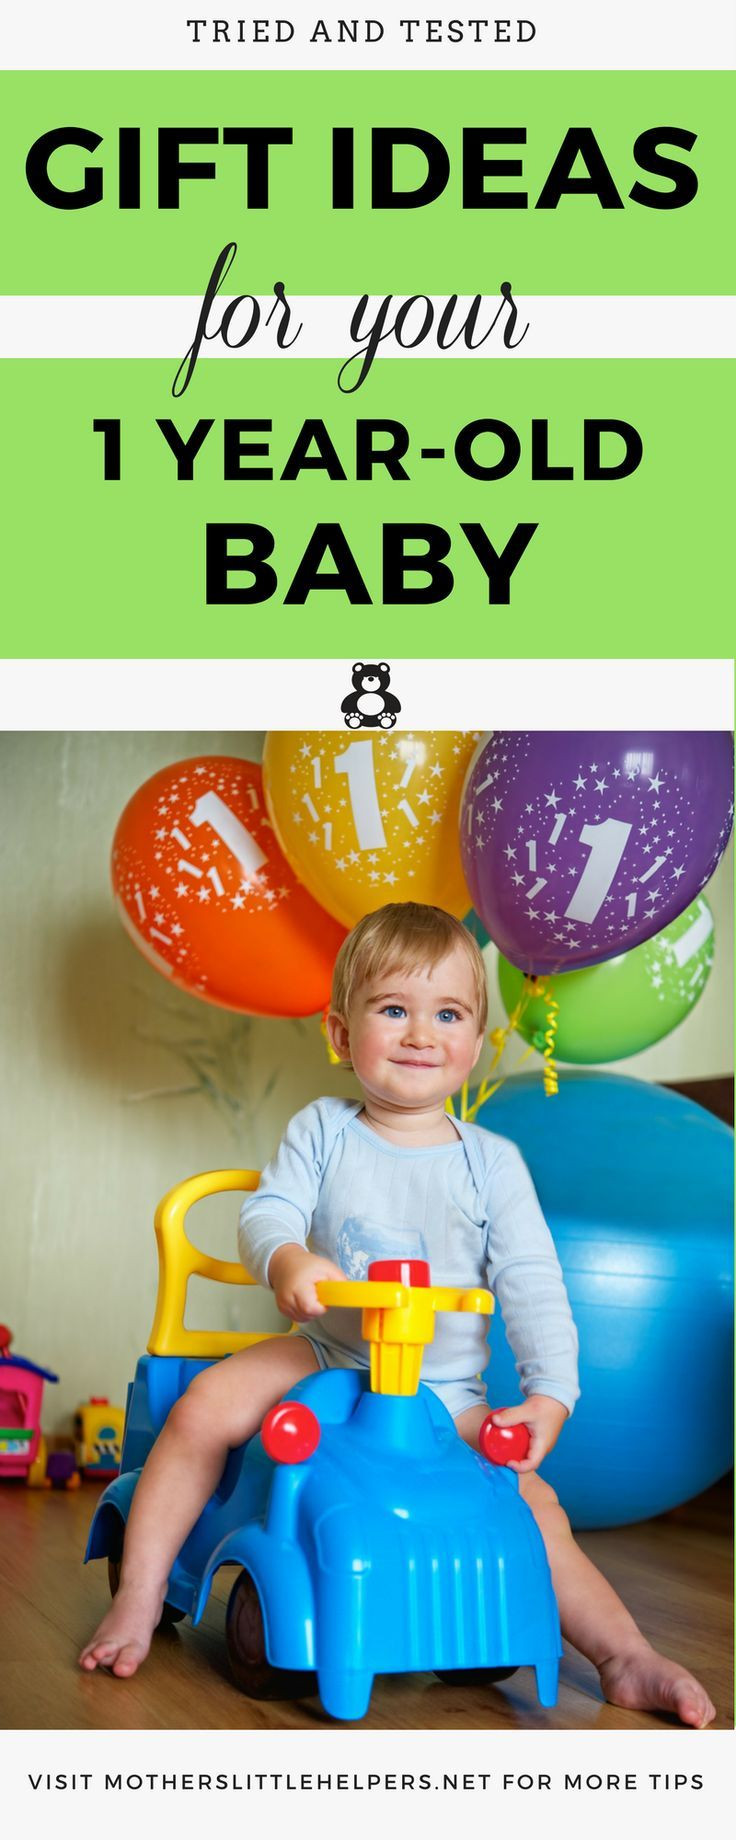 Gift Ideas For One Year Old Girls
 The 25 best Gift ideas for 1 year old girl ideas on